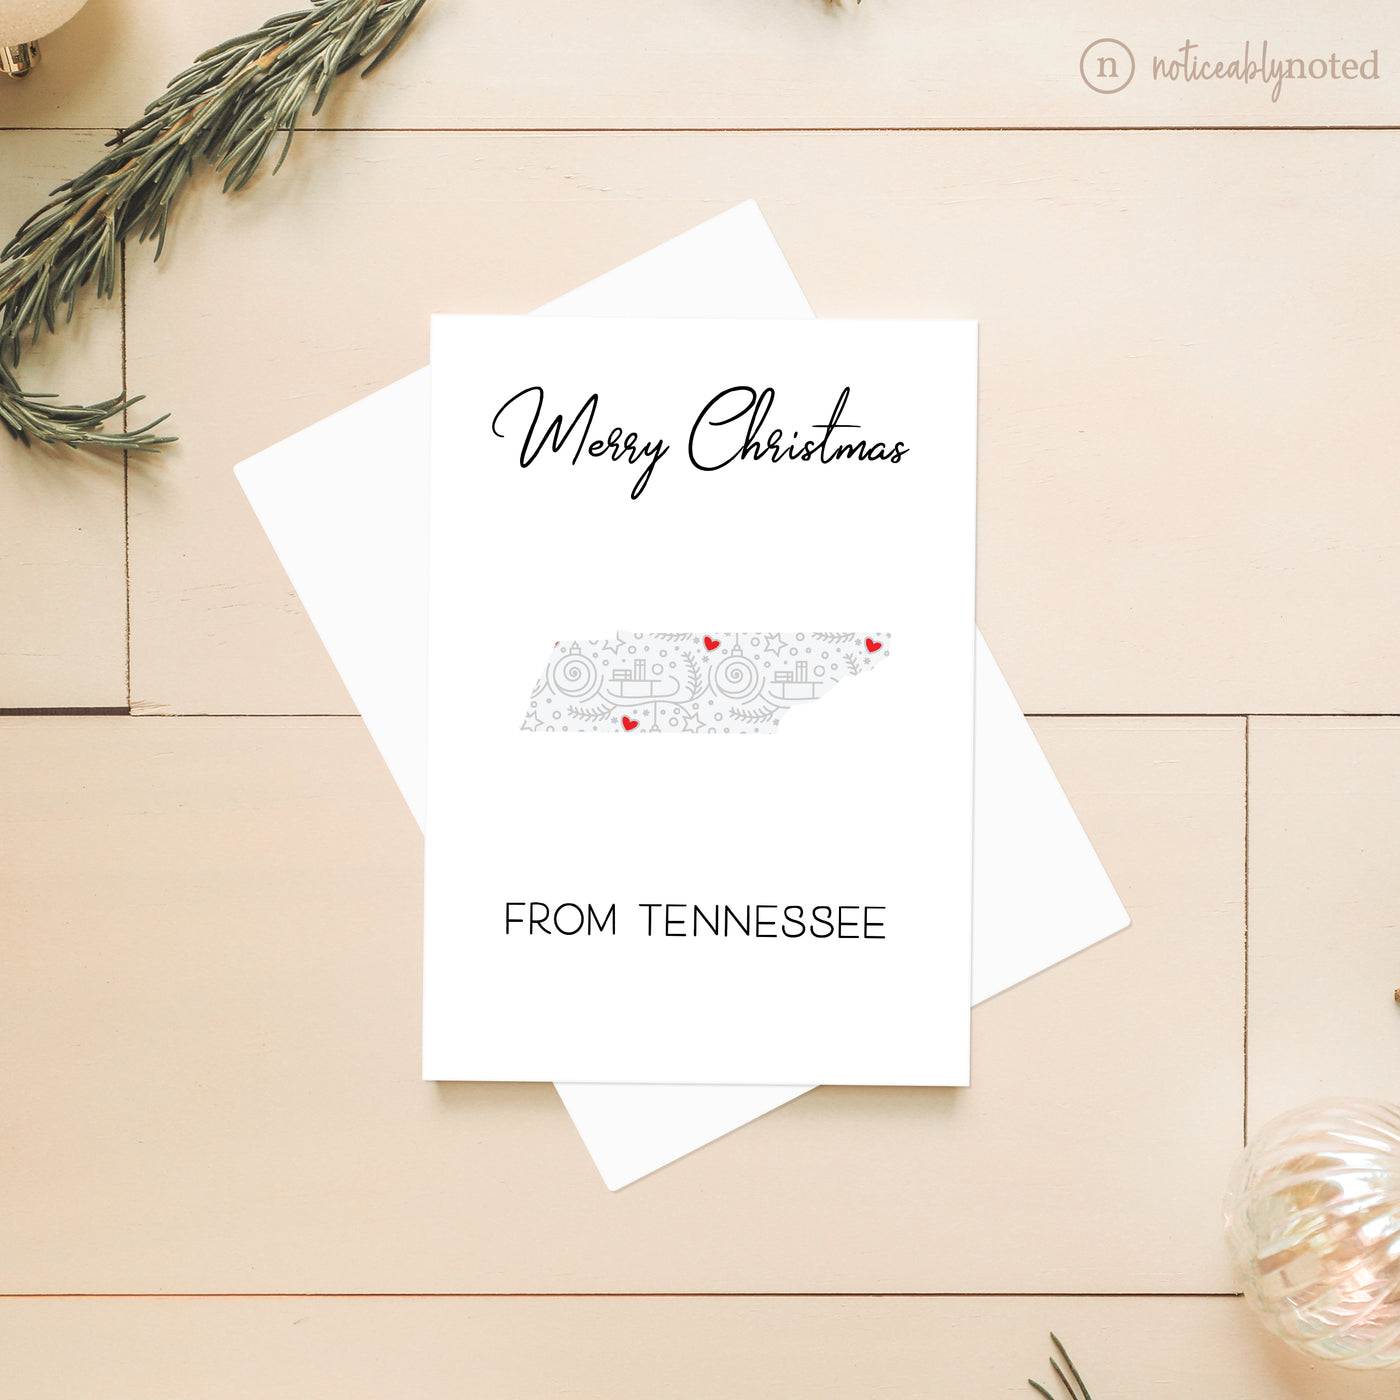 Tennessee Christmas Card - Merry Christmas | Noticeably Noted